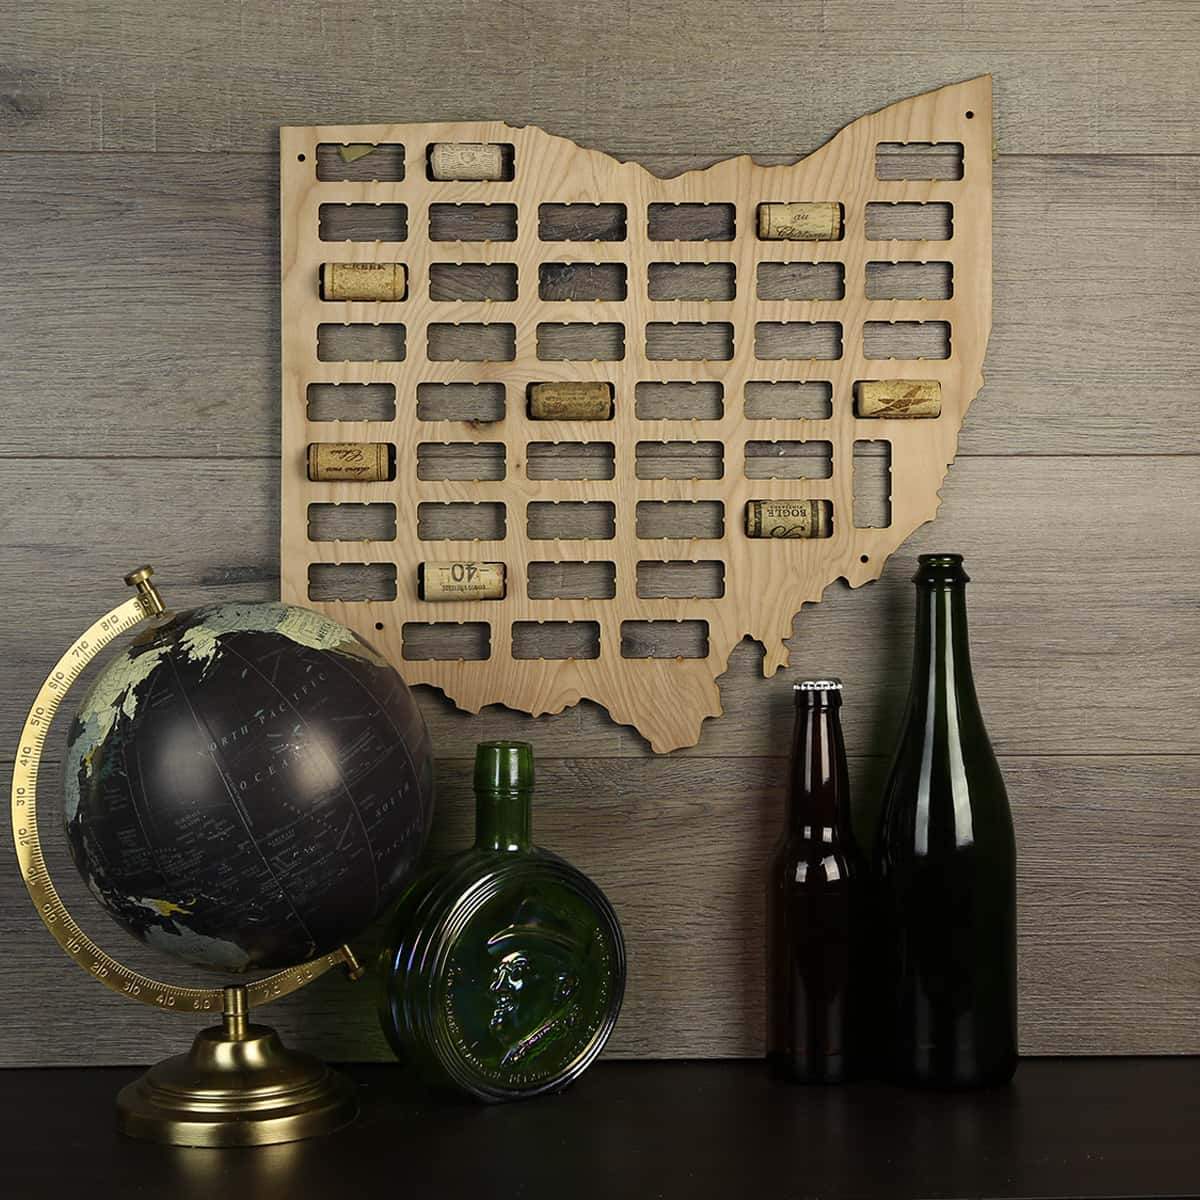 Torched Products Wine Cork Map Ohio Wine Cork Map (778980294773)